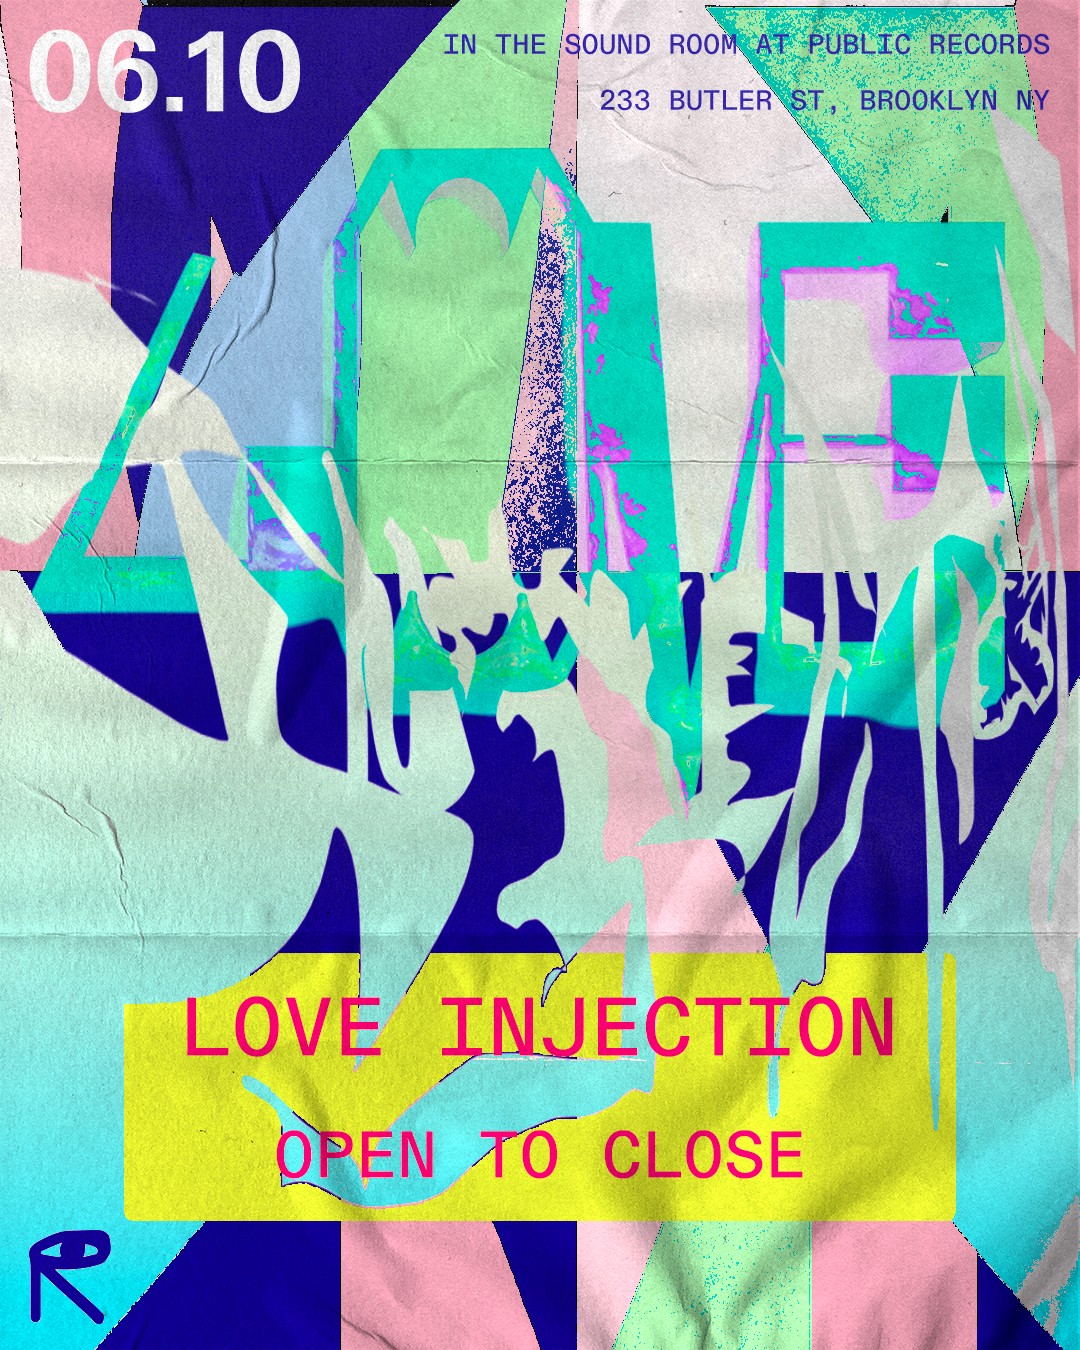 Love Injection at Public Records on 6/10 